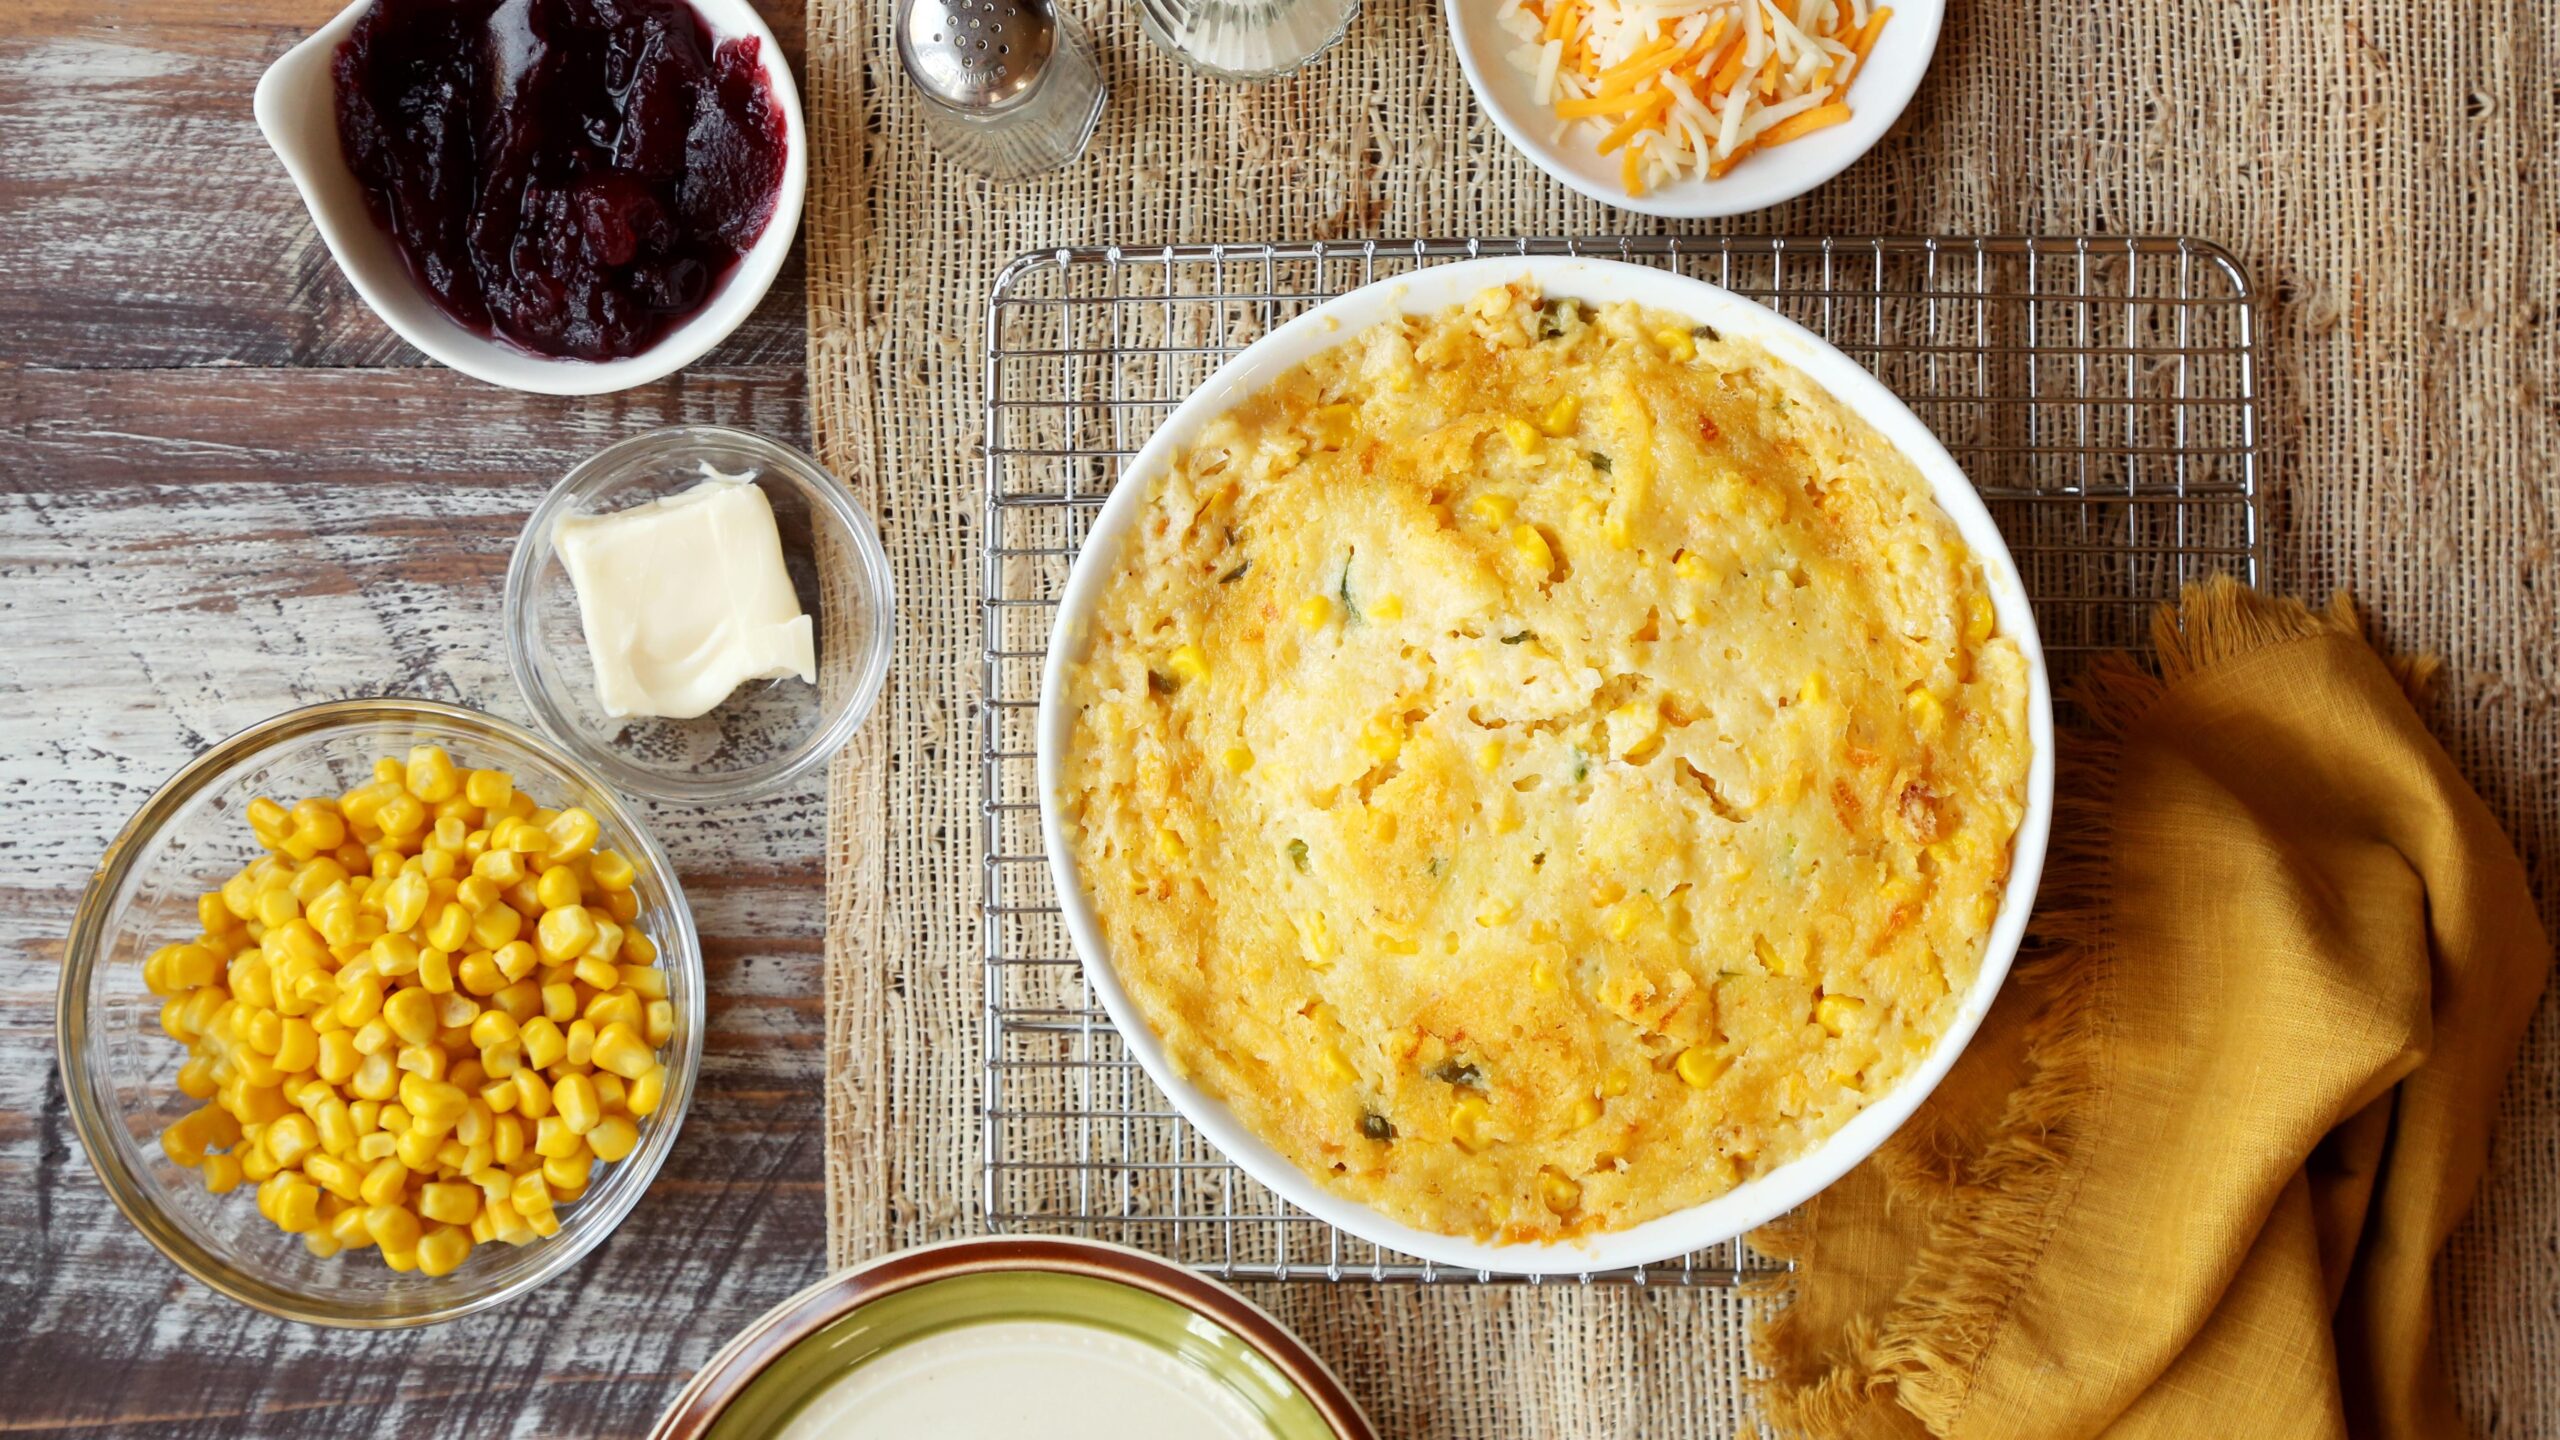  Golden corn kernels smothered in a blanket of melted cheese